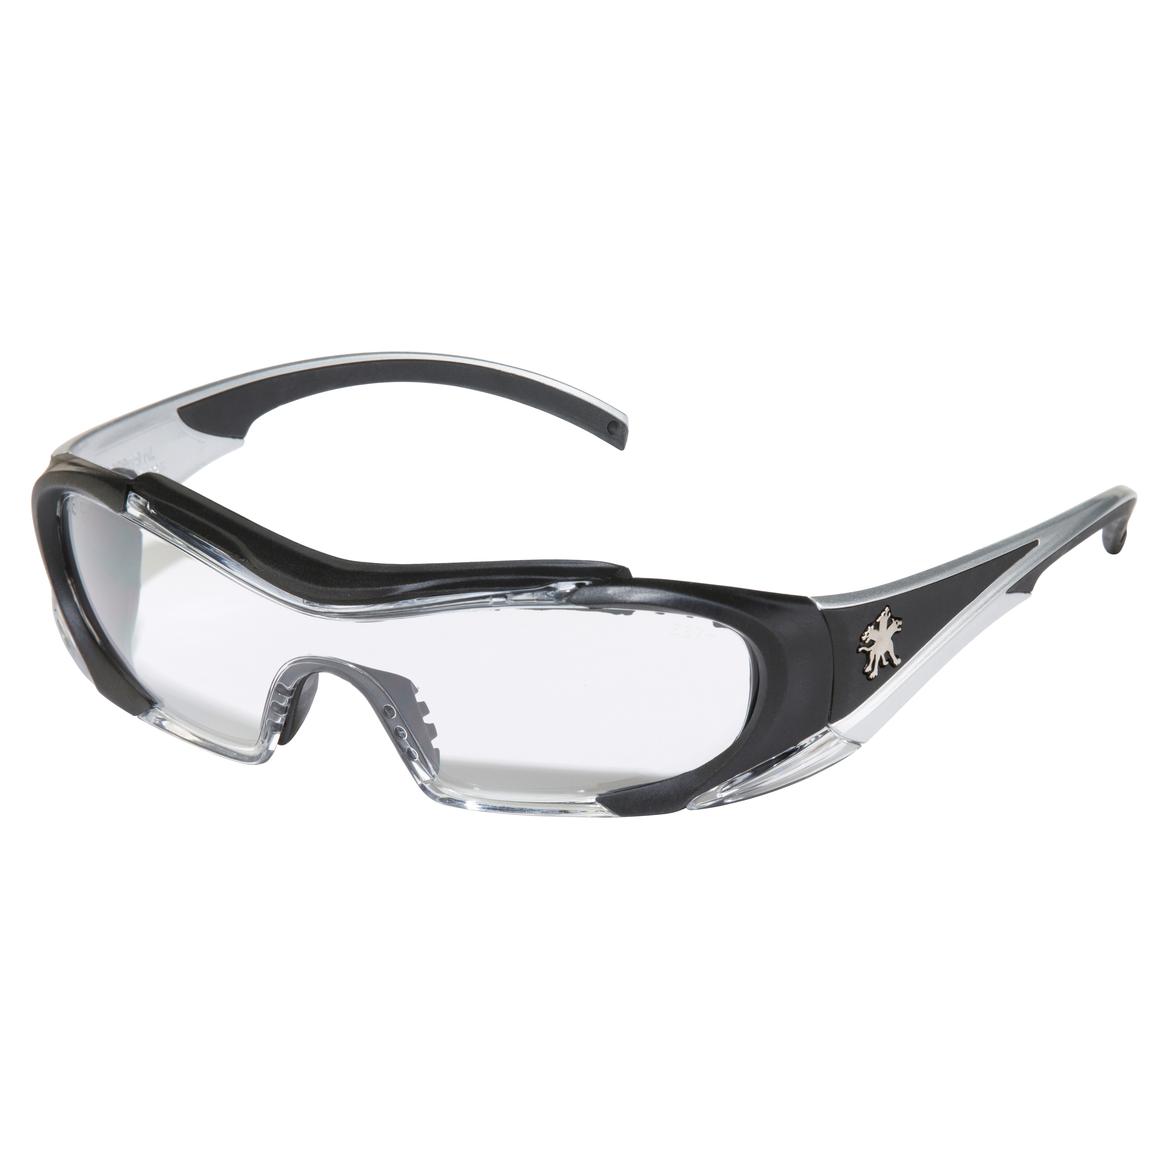 Crossfire M6A 201615 Indoor Outdoor Lens Safety Glasses - Box of 12